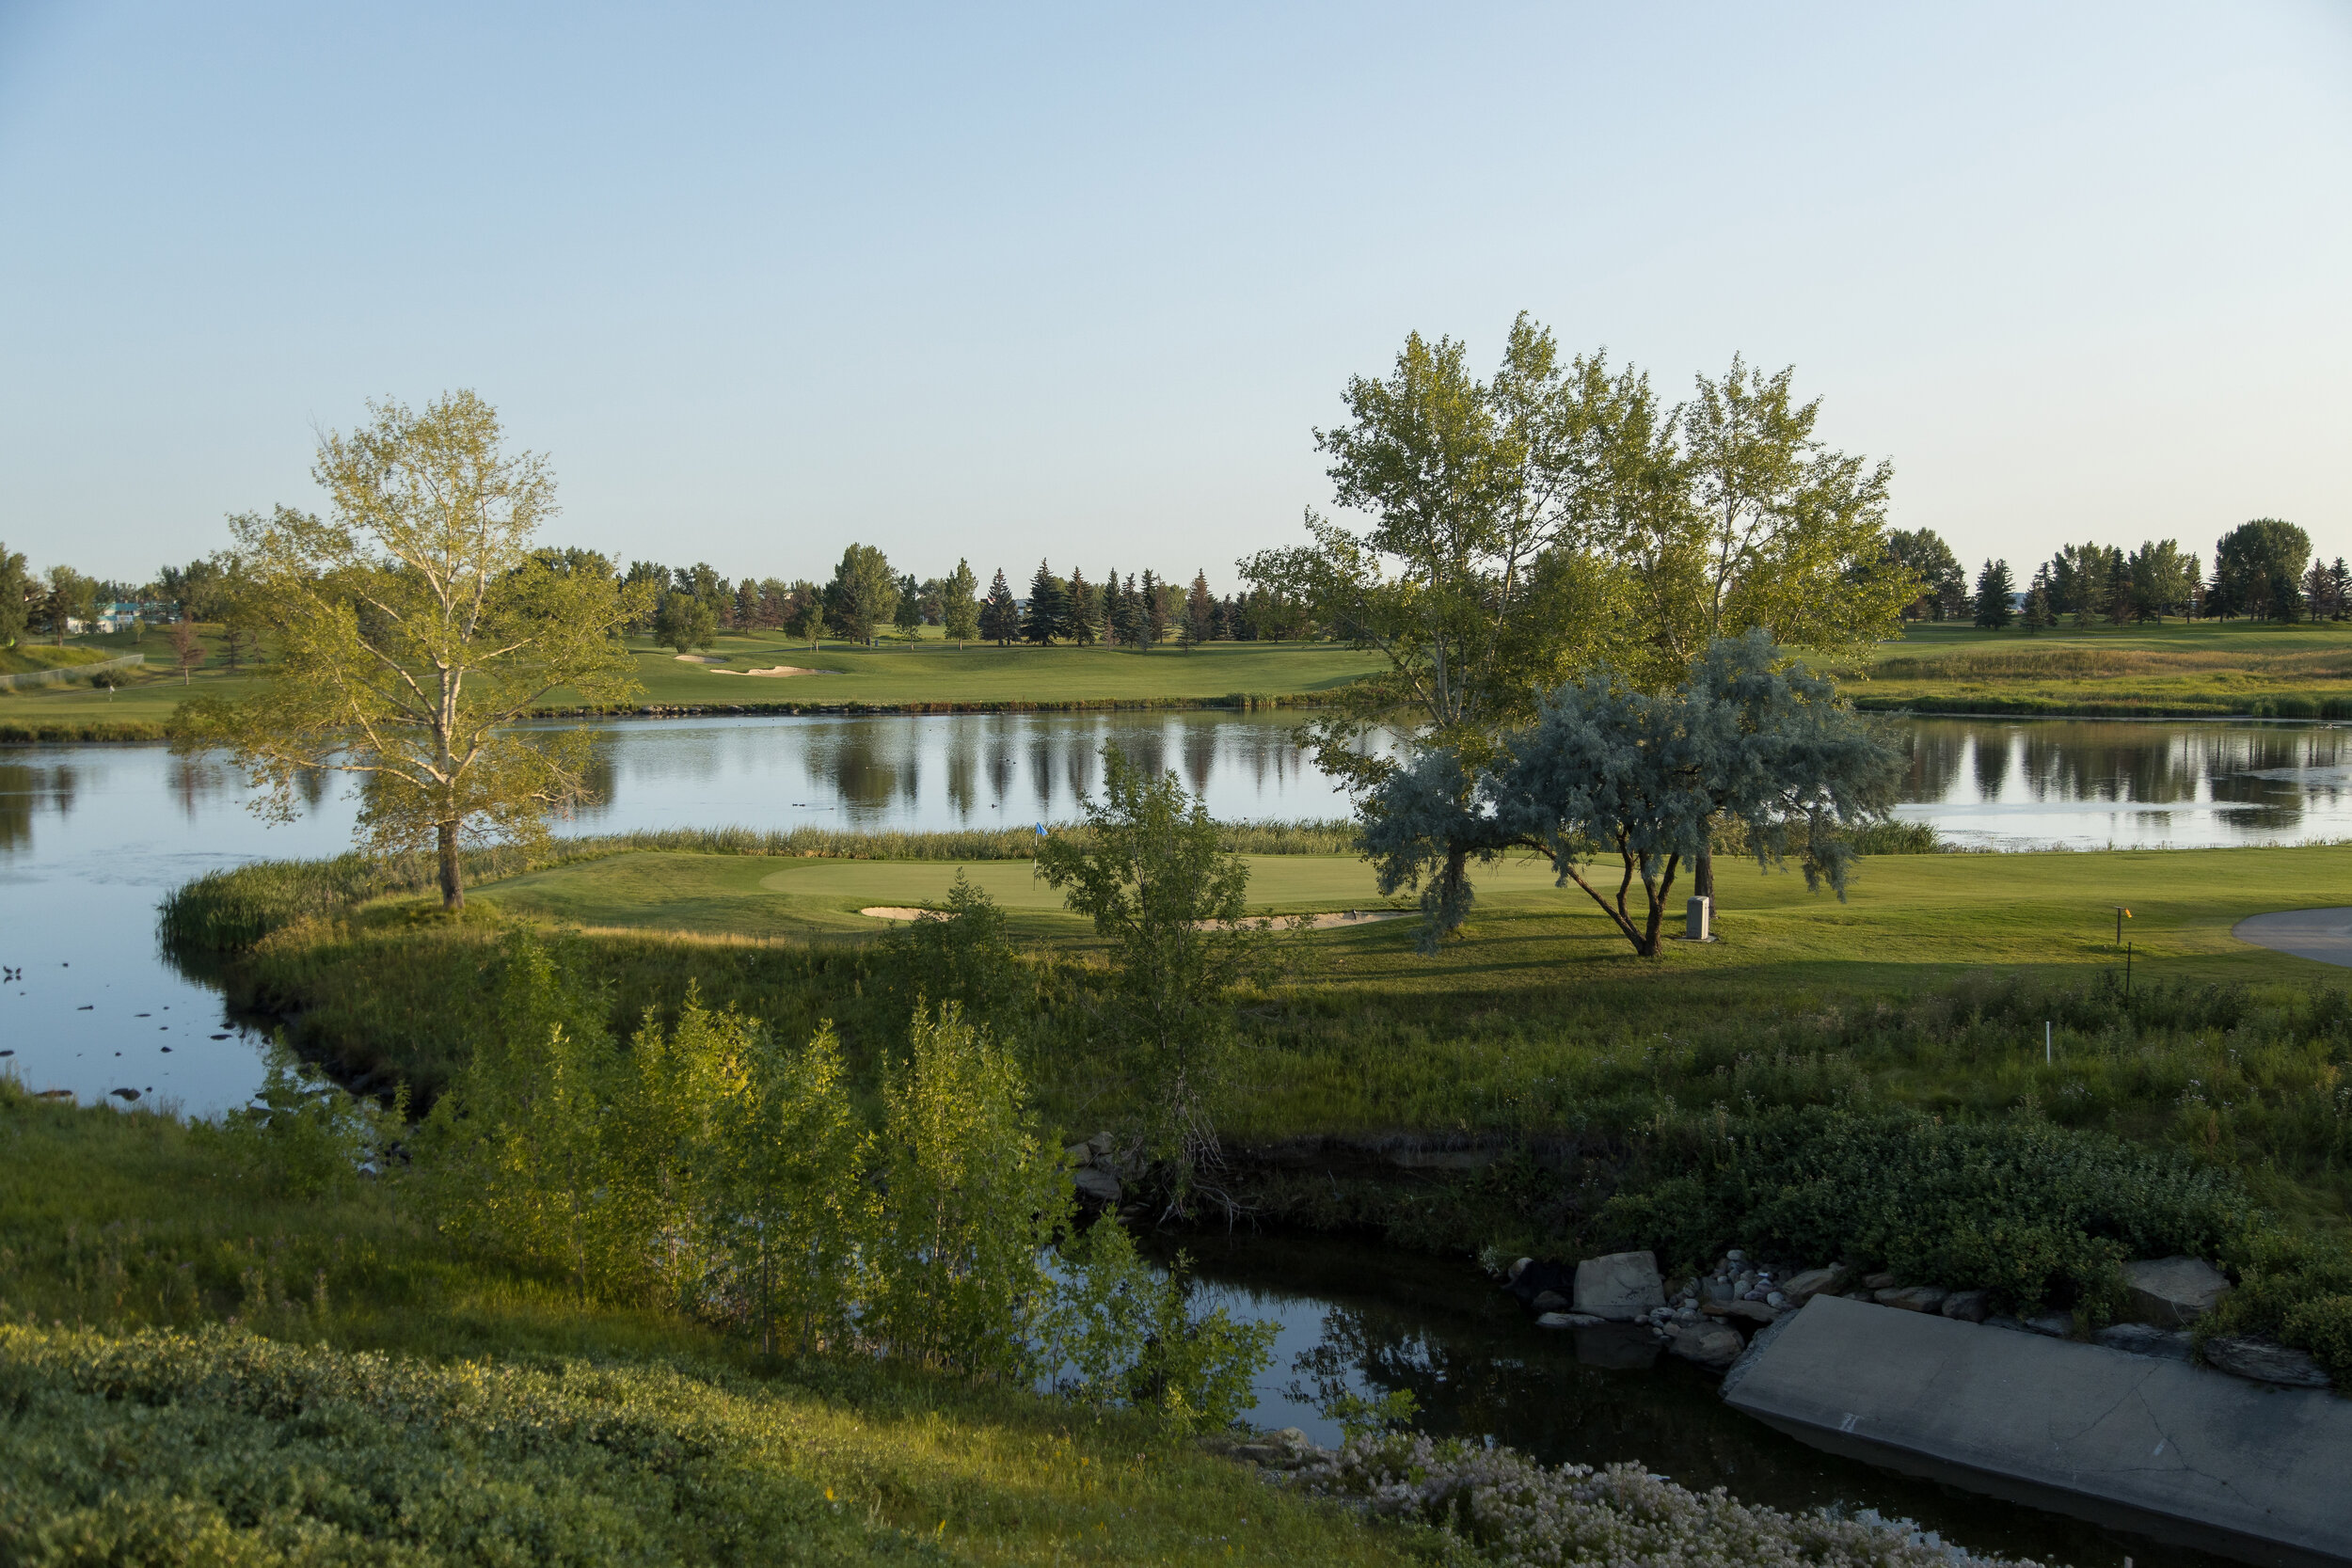  SCOPE Projects played the lead role in the 18-hole renovation of the McCall Lake Golf Course, which included new bunkers, tee boxes and resurfaced greens in 2018-2019. 